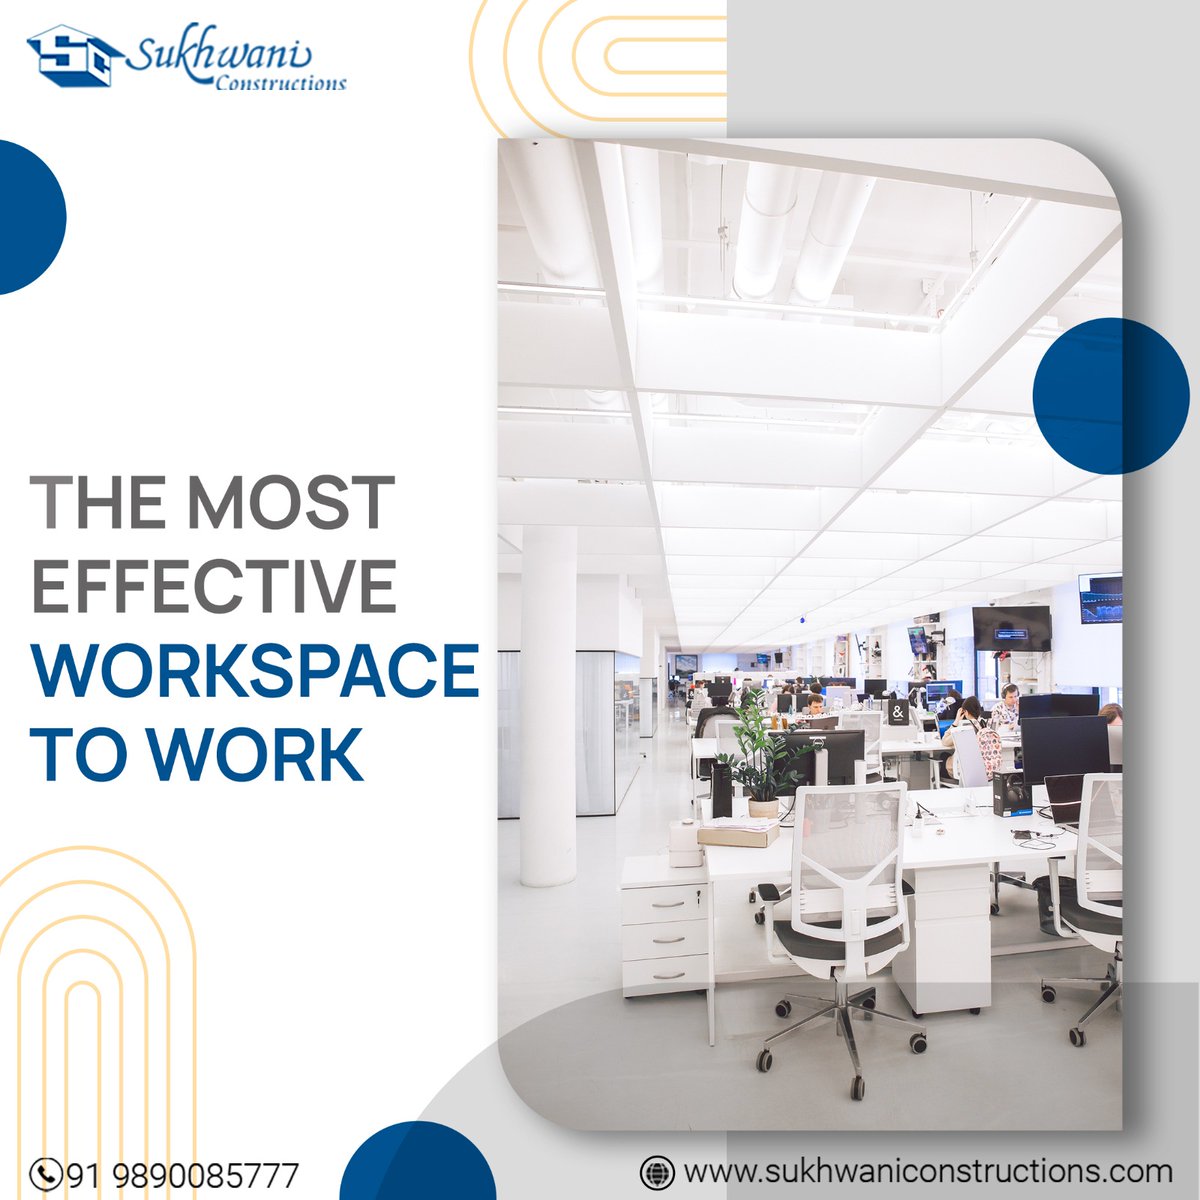 Book your office space today!!

📱+91-9890085777
🌐 sukhwaniconstructions.com
.
.
.
#SukhwaniBusinessHub #SukhwaniConstruction #Meeting #Officespace #Business #Entrepreneur #Pune #WellEquipped #Smart #Maharashtra #Workplace